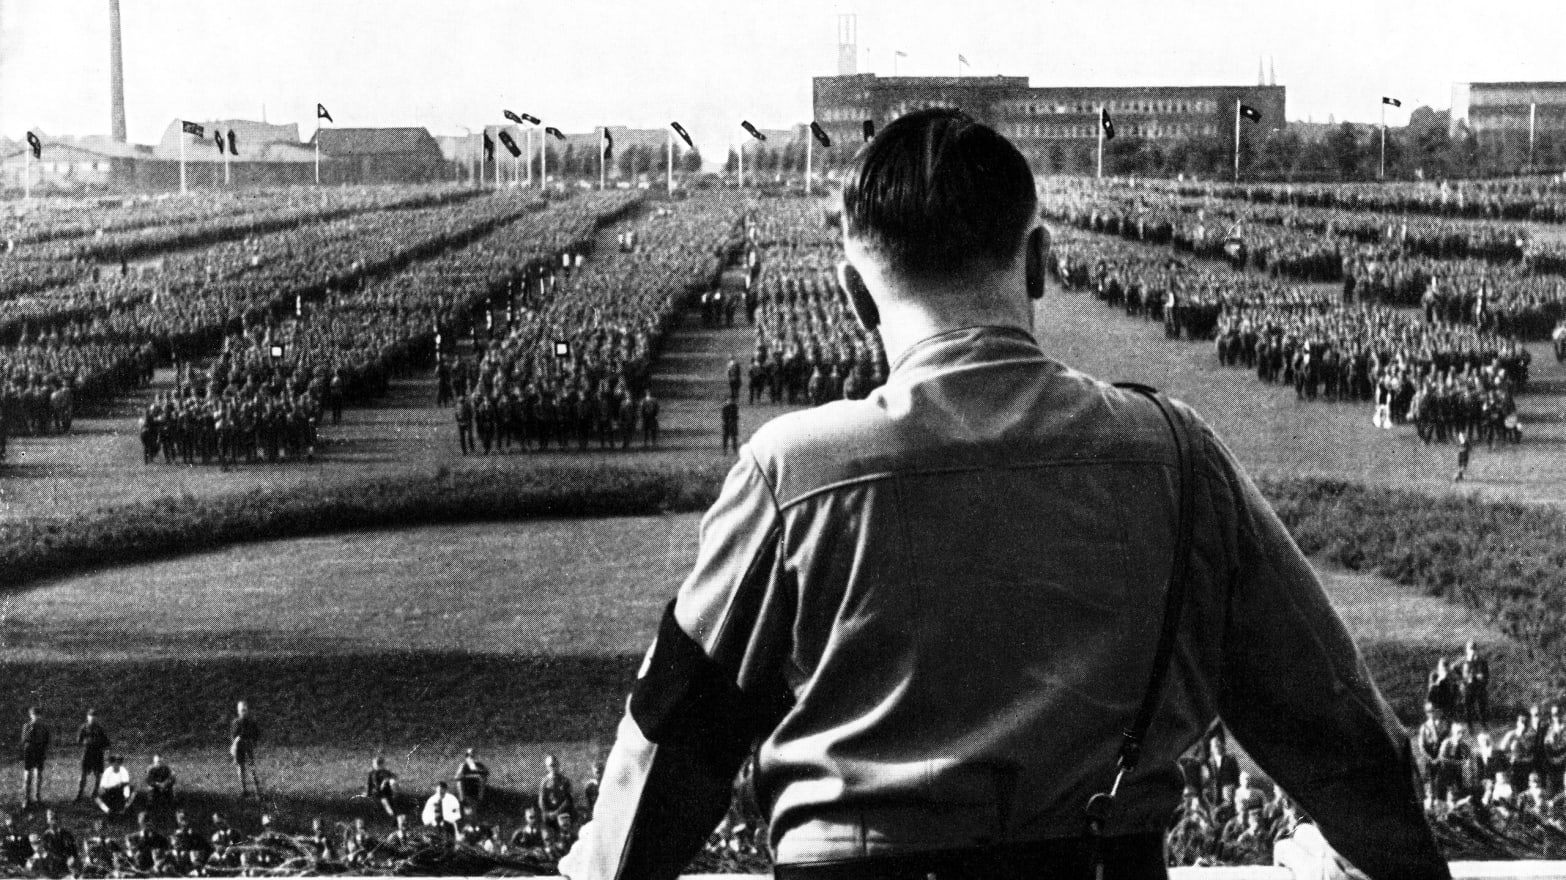 The NAZIS Seize Power - Hitler : Germany's Fatal Attraction | Reel Truth History Documentaries